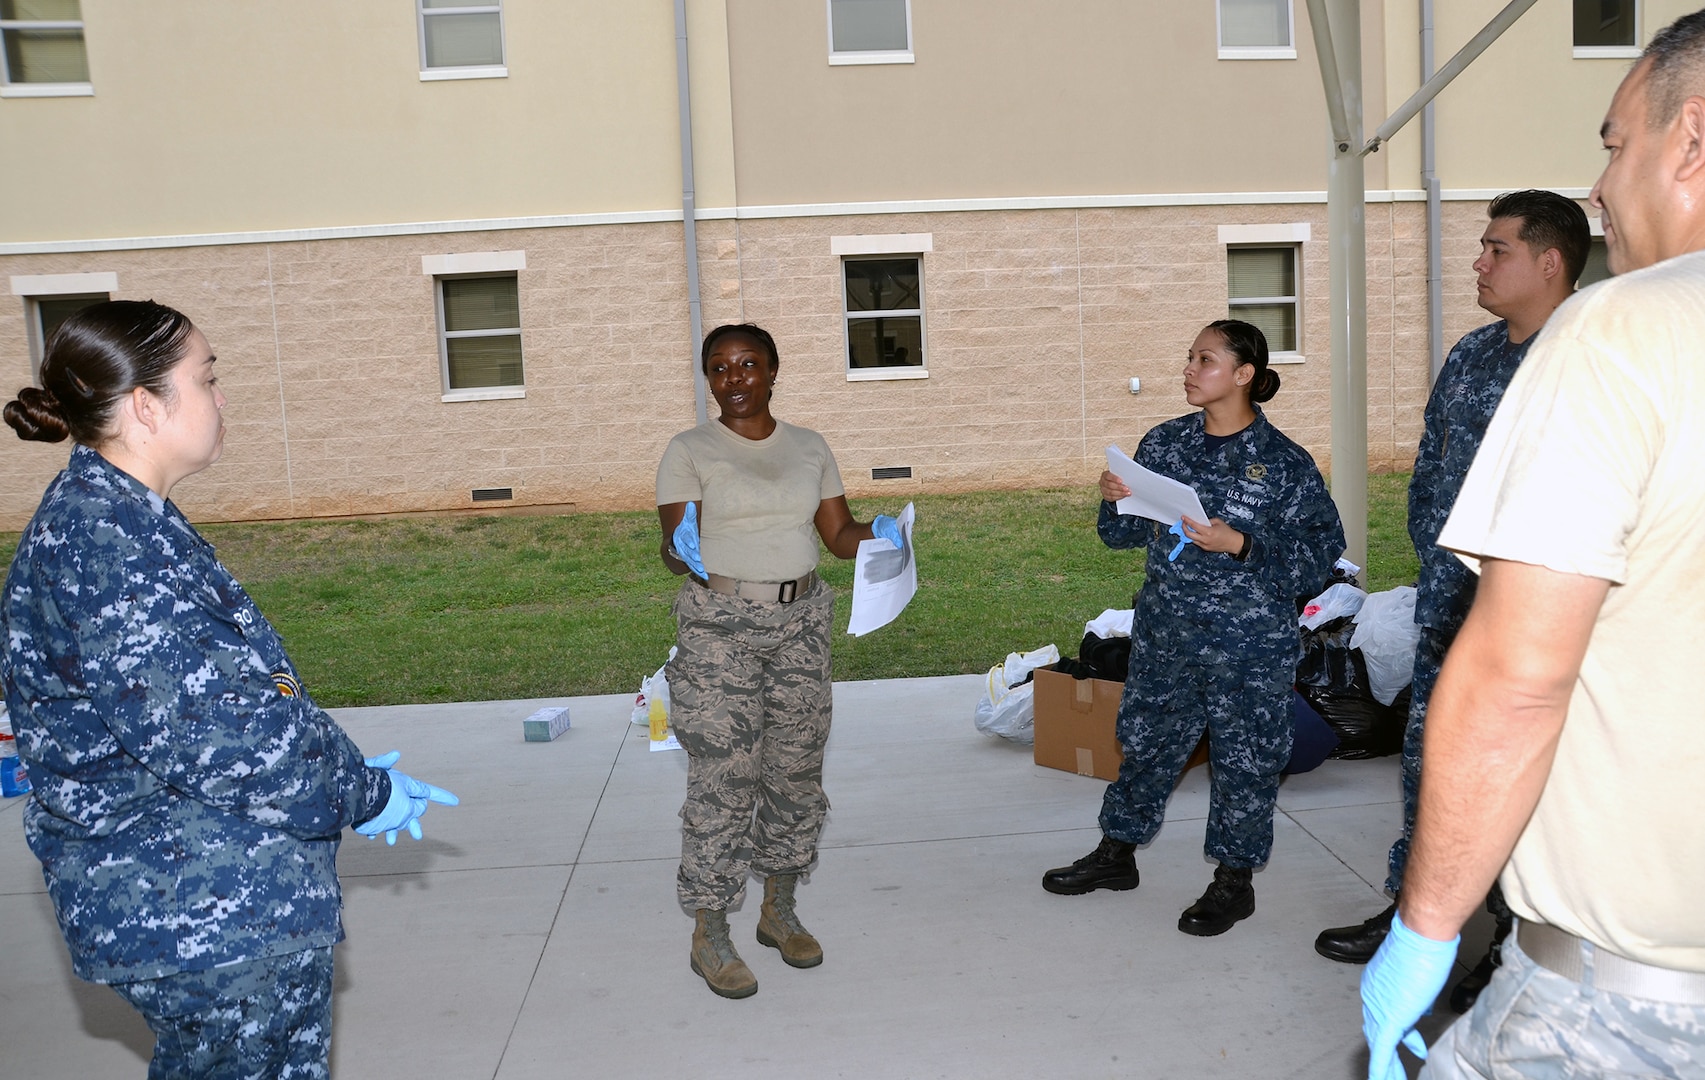 1st Lt. Ebony Shannon (center), Medical Education and Training Campus Support Center Information Technology Director, organizes volunteer efforts to sort through bags and boxes of donations collected for victims of Hurricane Harvey Sept. 19. In all, the team collected and donated 450 pounds of food to the San Antonio Food Bank, $3,300 in donated diapers to the Diaper Bank, $19,000 in clothing and incidentals to the Salvation Army, and numerous donations to the American Society for the Prevention of Cruelty to Animals and homeless shelters.